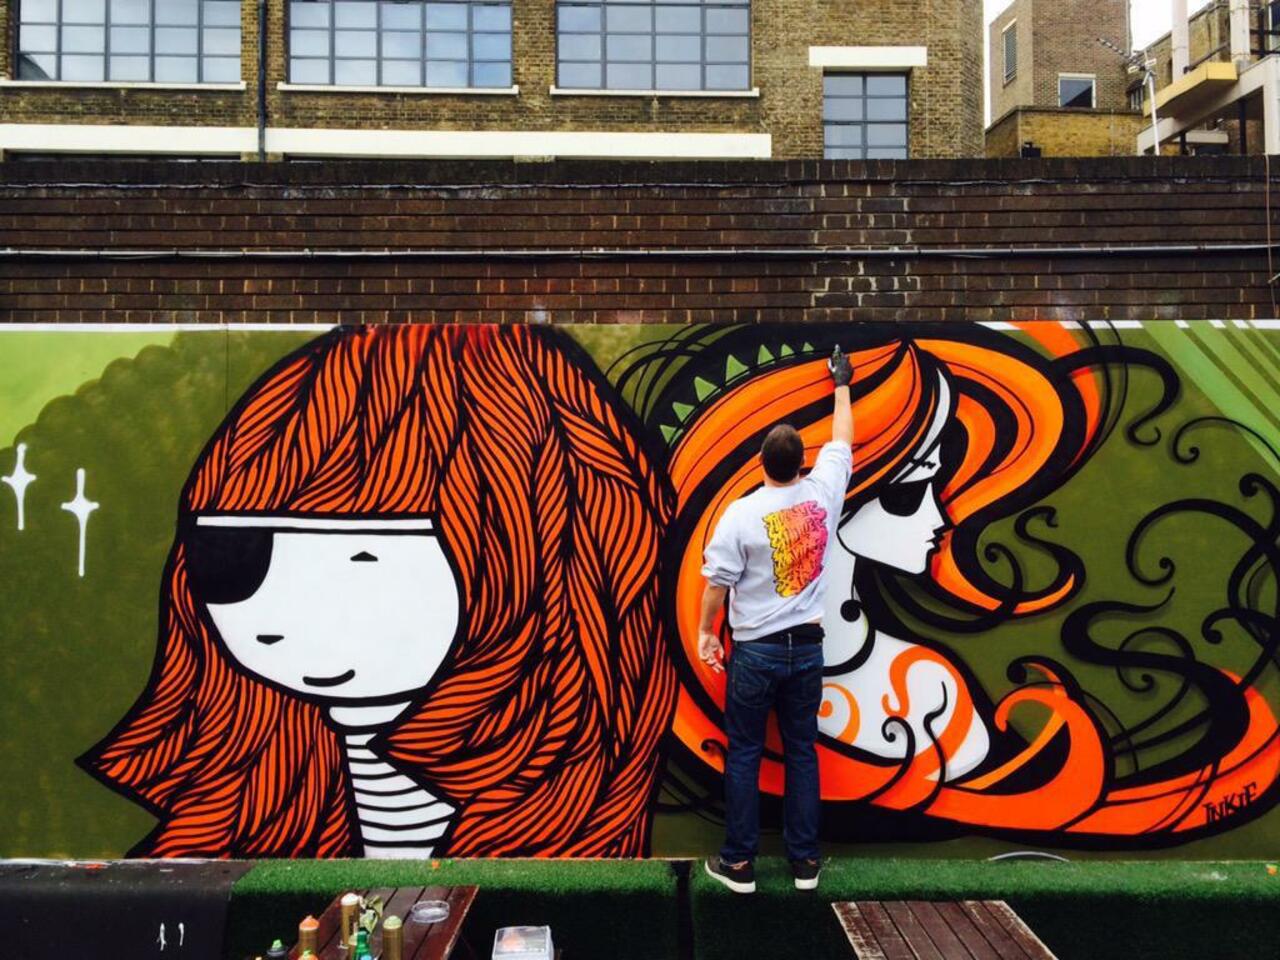 New CoLab from yesterday withy pal @kid_acne @monikerprojects @MontanaCansUK @trumanbrewery #streetart #graffiti http://t.co/UIx46ItN9z